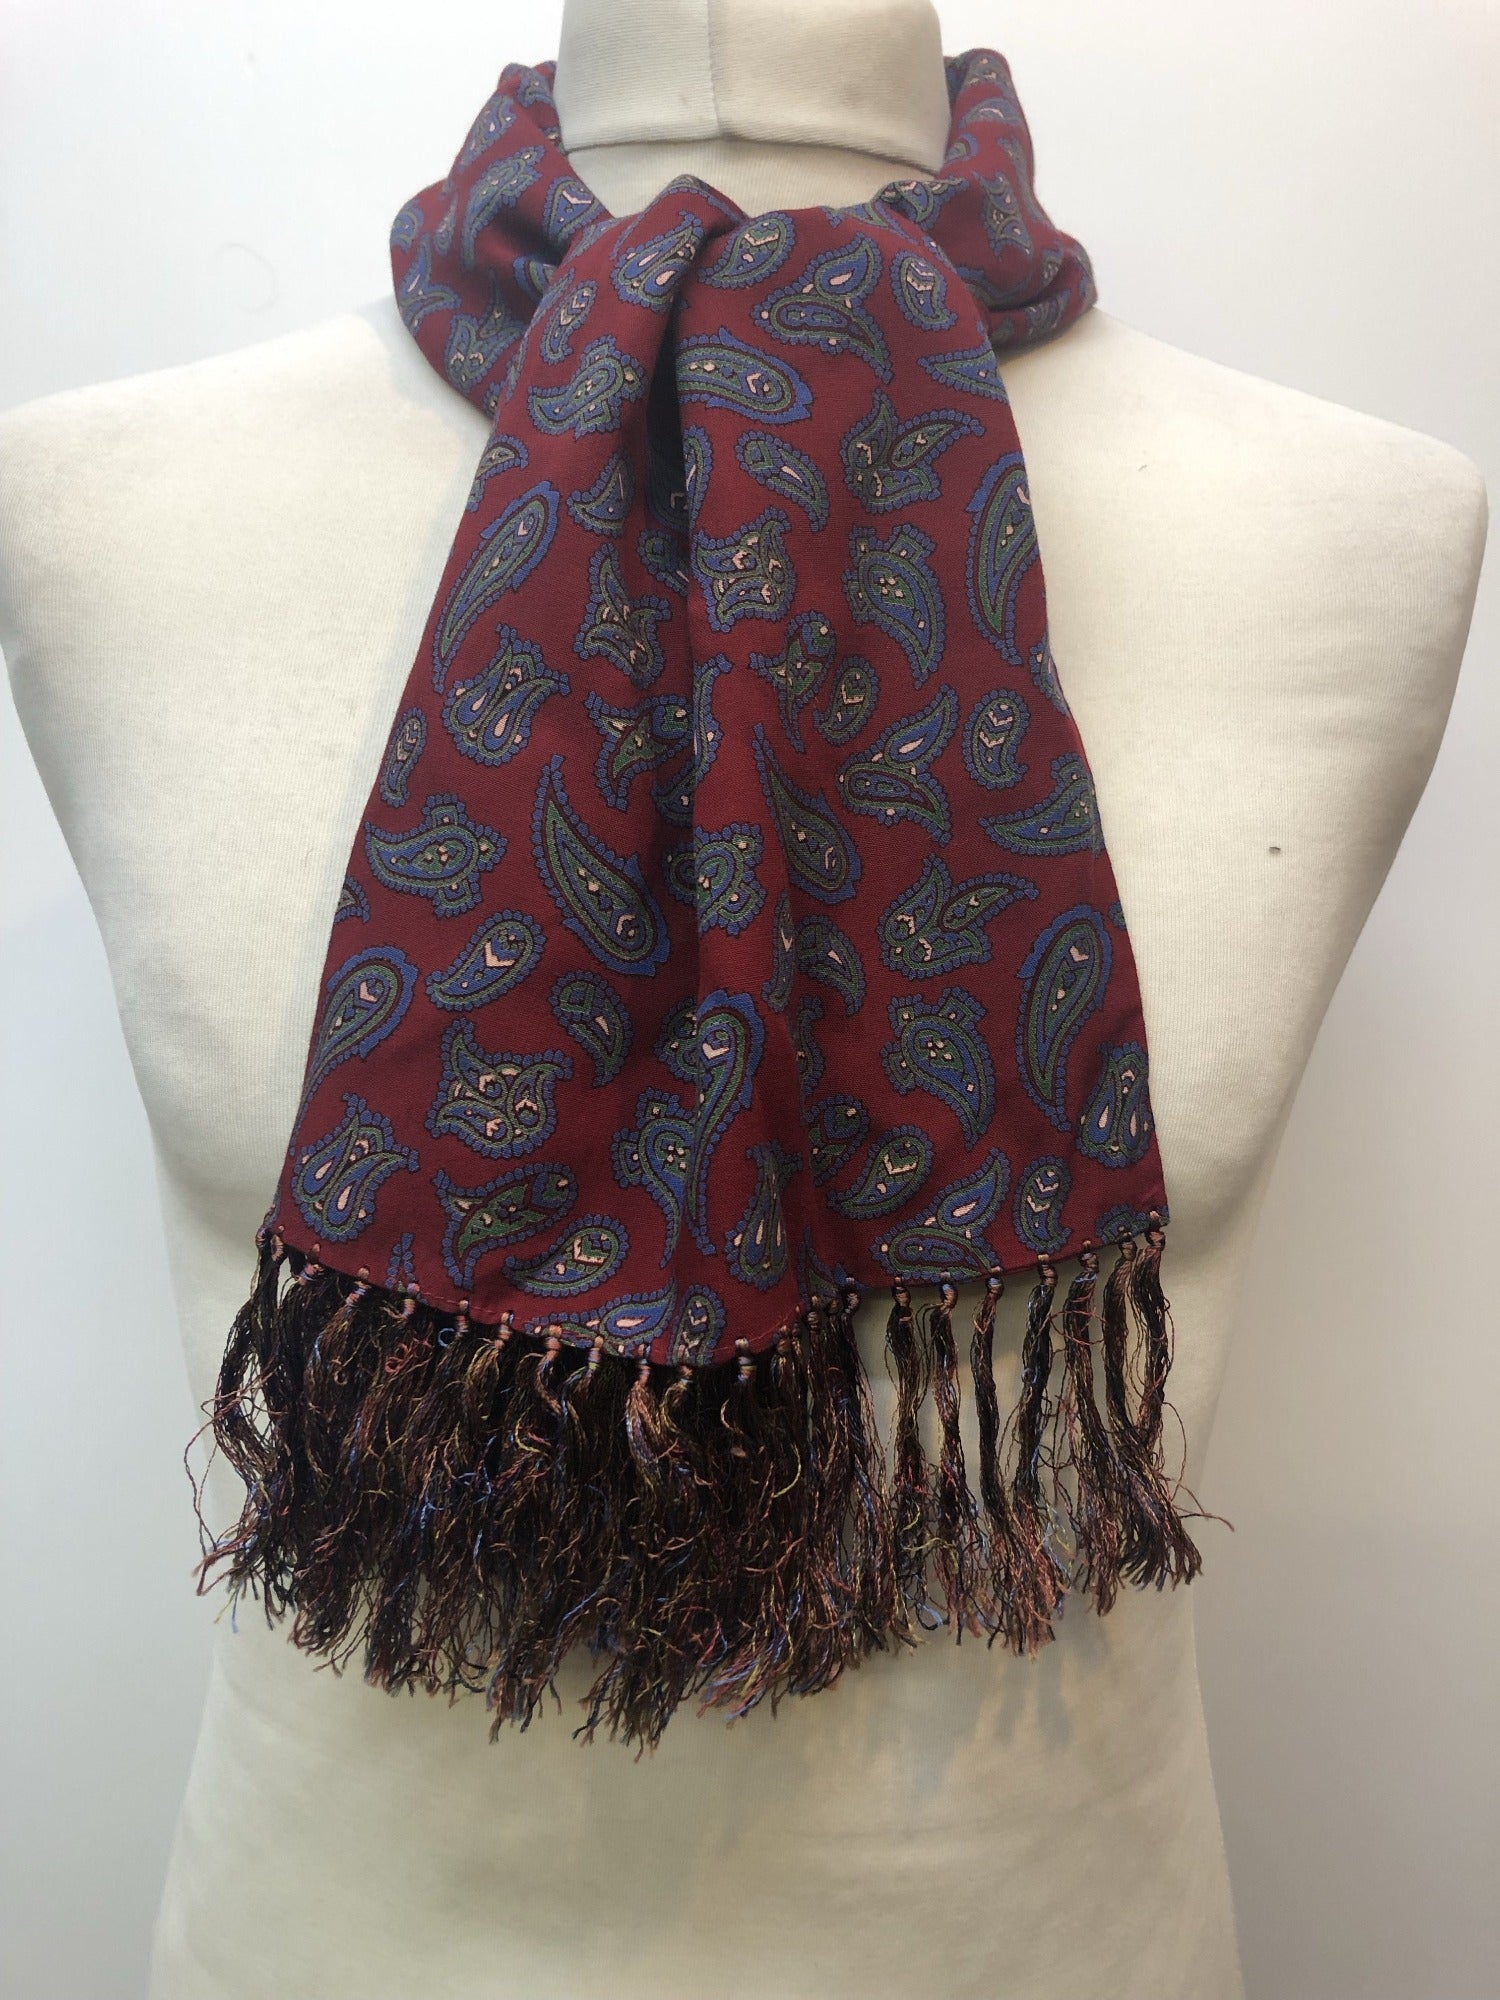 vintage  Urban Village Vintage  urban village  scarf  red  Paisley Print  paisley inspired  paisley  MOD  mens  made in england  Jox Ford  fringed  fringe  60s  1960s